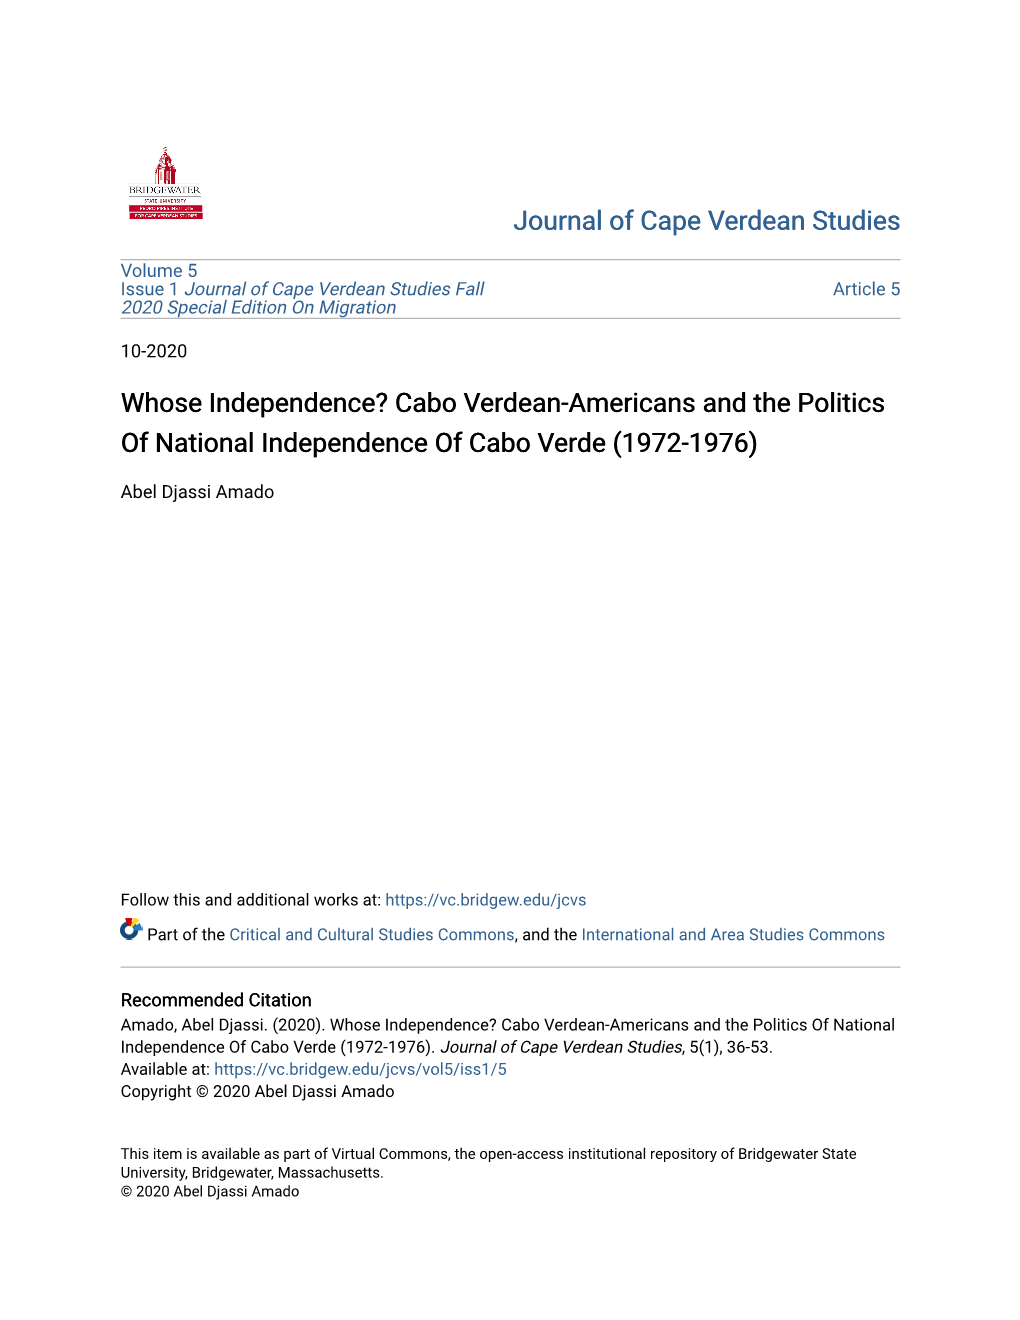 Cabo Verdean-Americans and the Politics of National Independence of Cabo Verde (1972-1976)